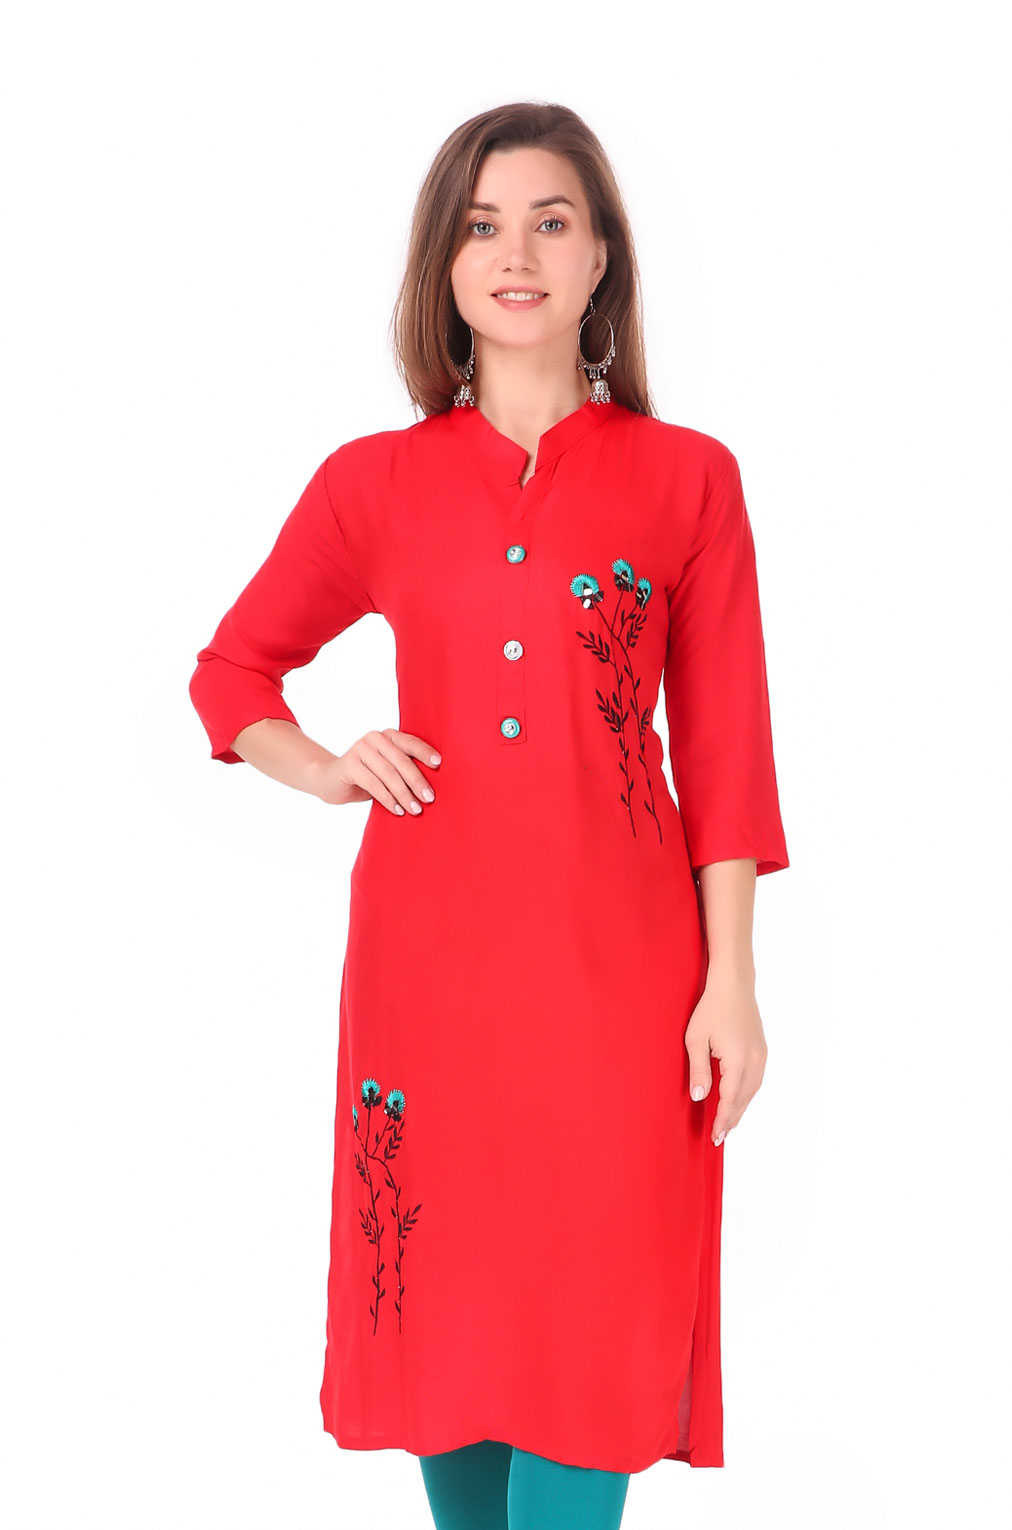 Buy Spendworth Orange Yellow Cotton Round Neck Zari and Thread Embroidered  Designer Kurti with Buttons On Front at Amazon.in